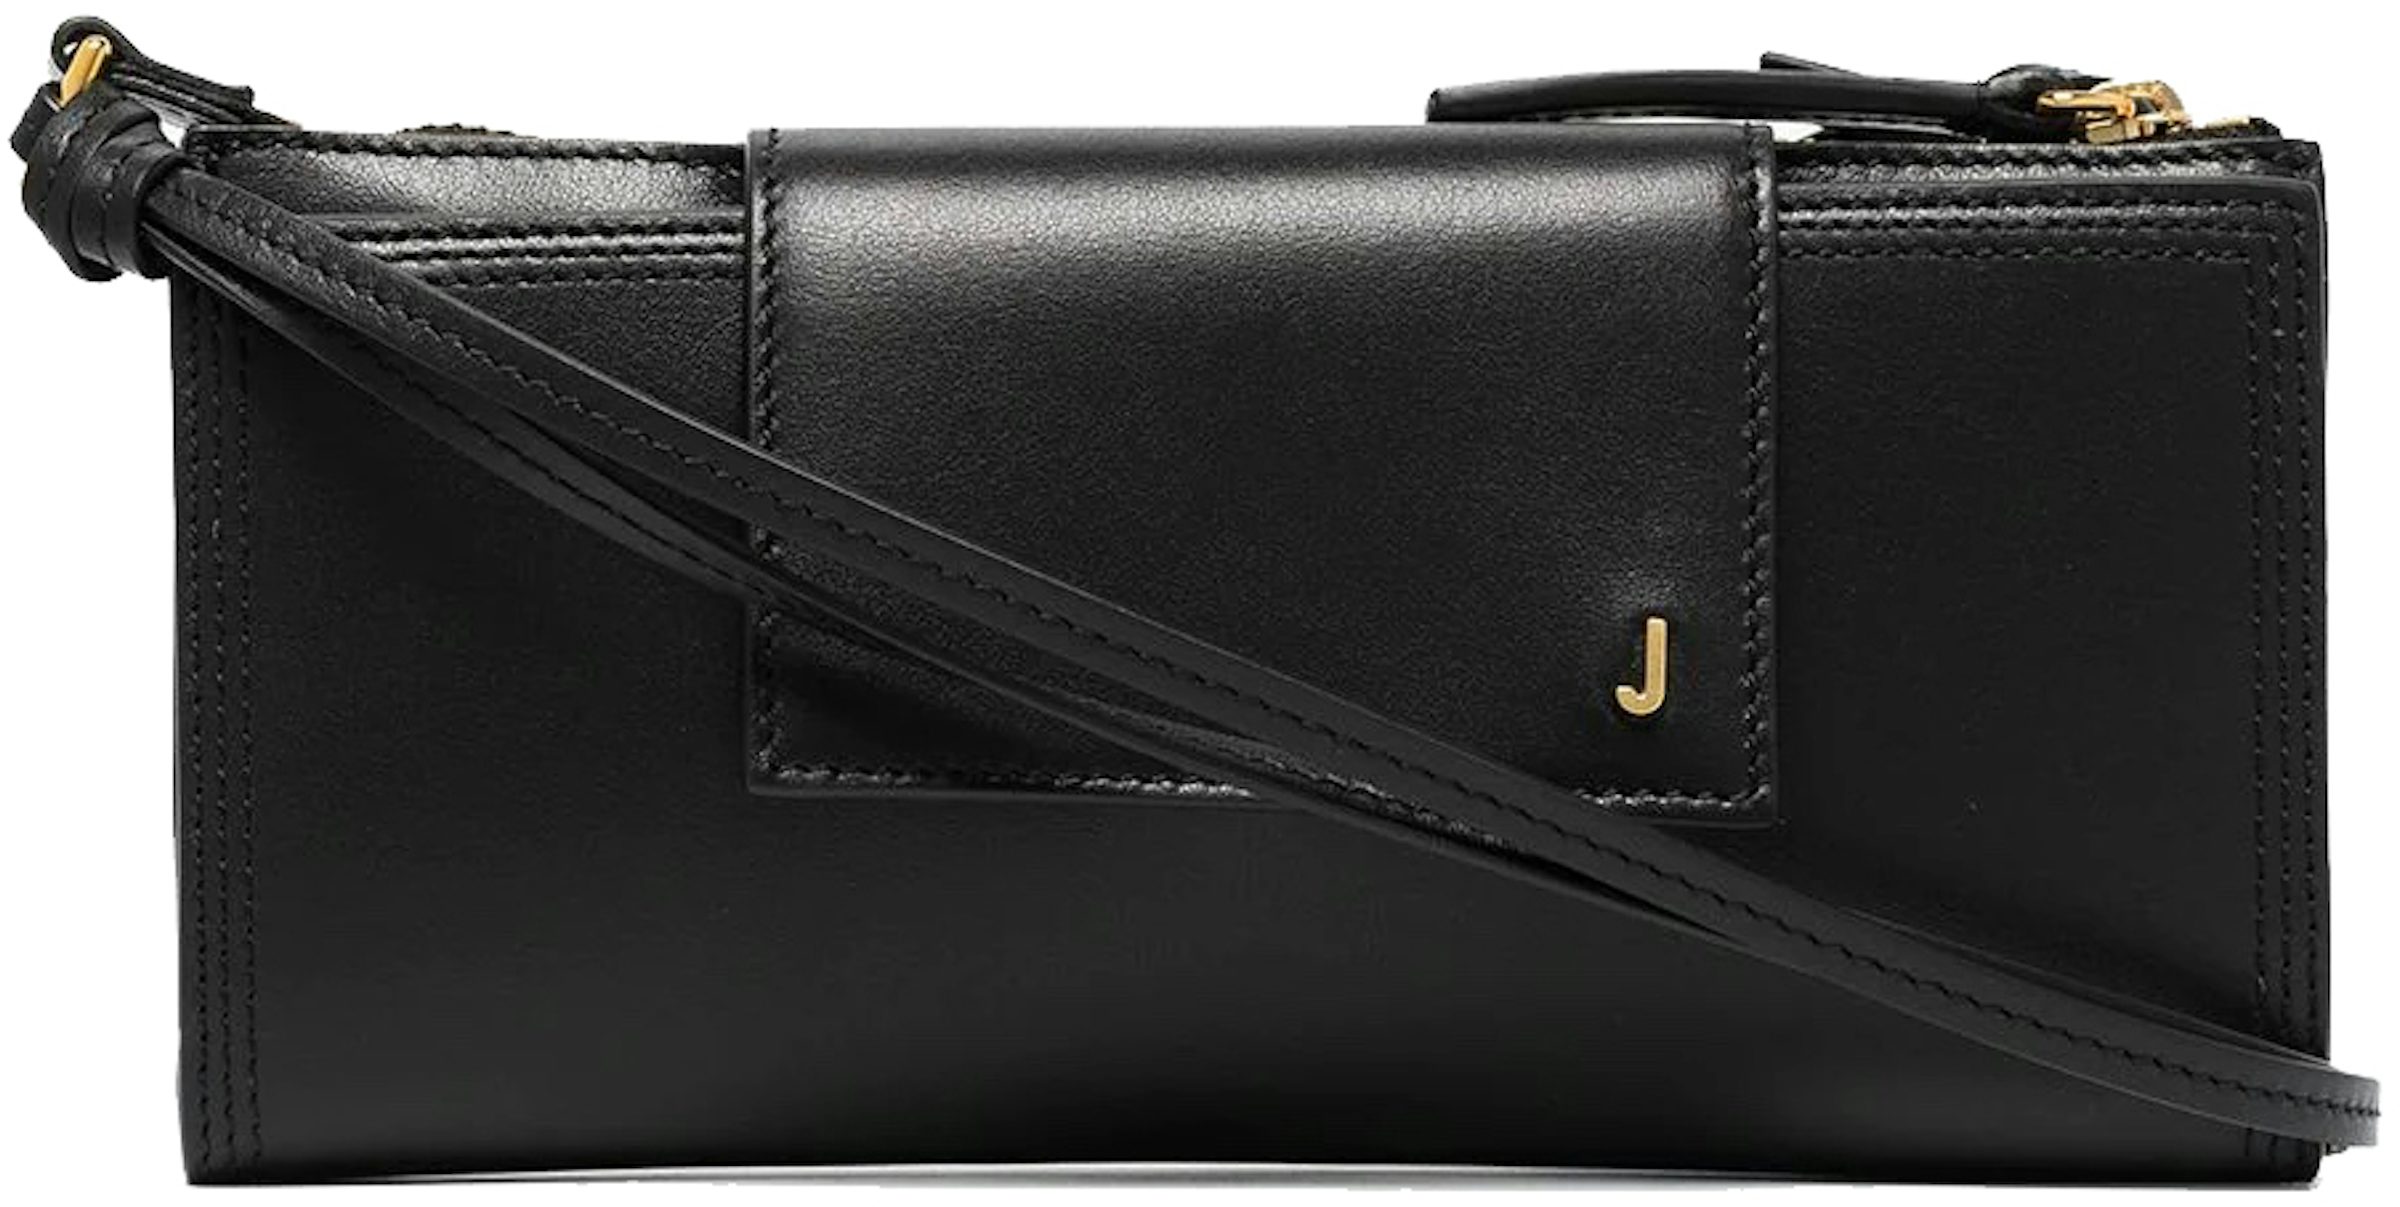 Le Chiquito Homme Crossbody - Jacquemus - Black - Leather